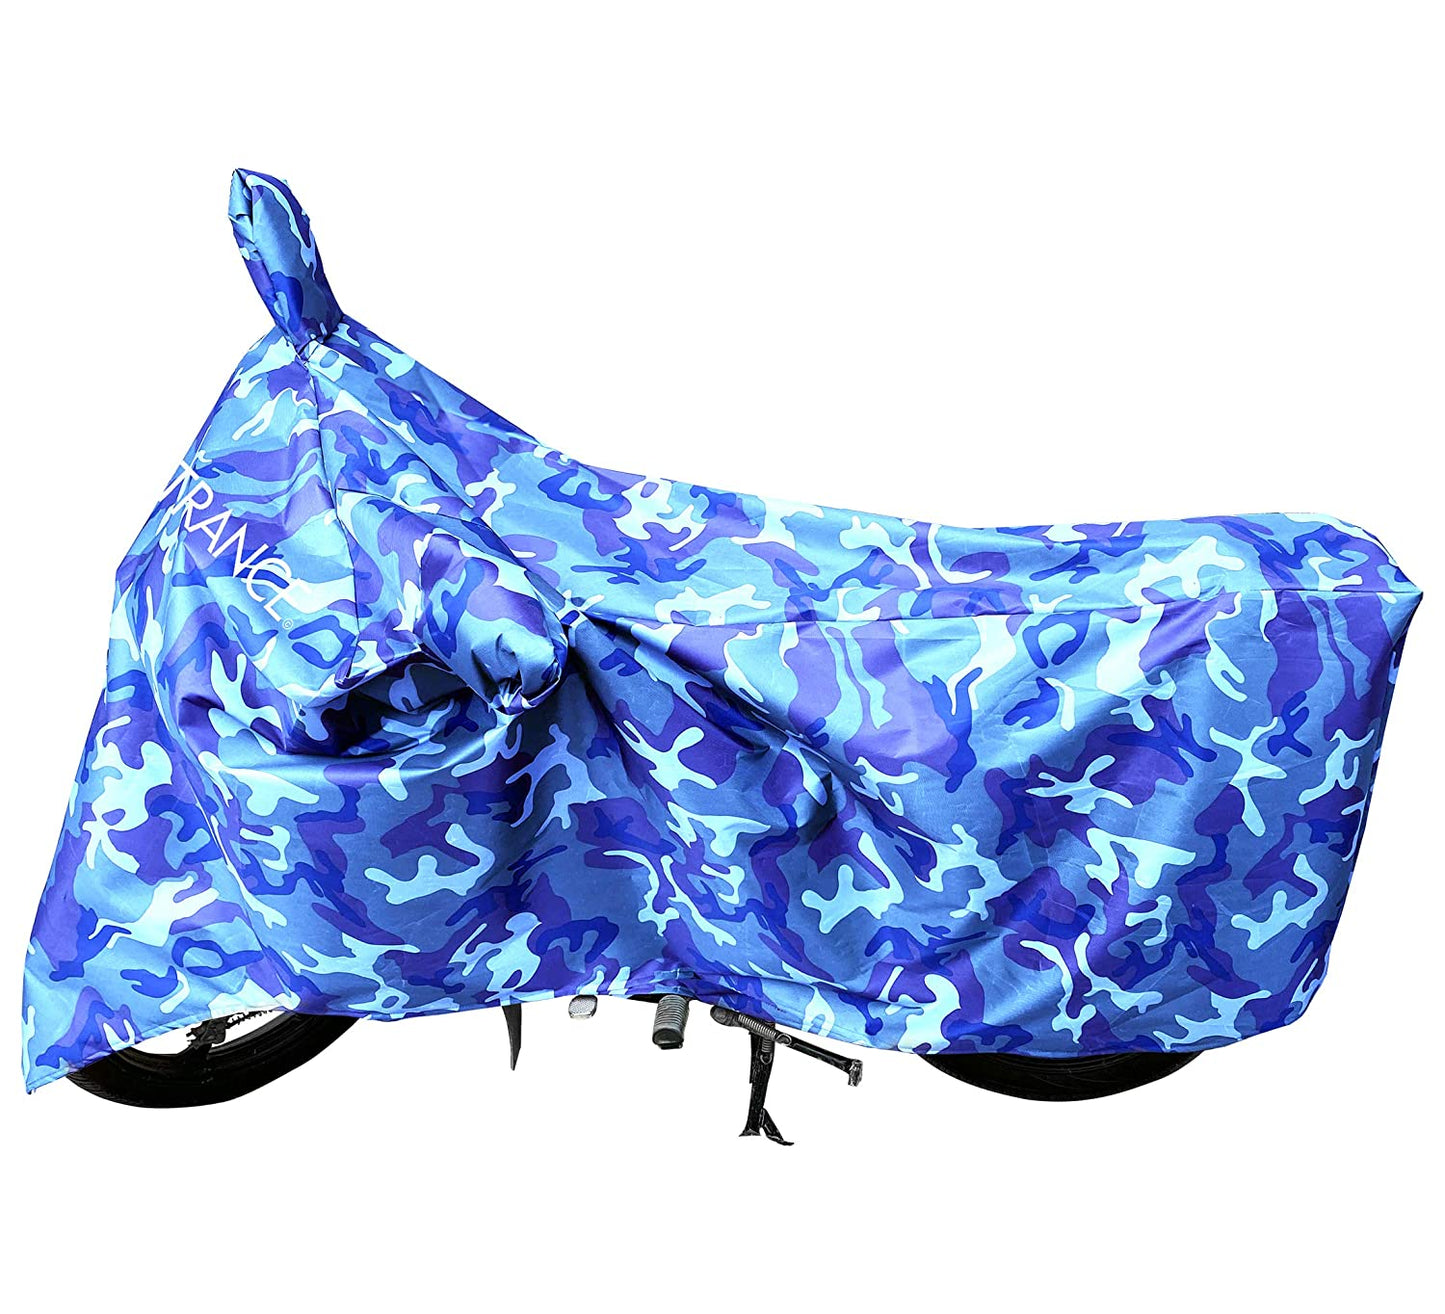 MotoTrance Jungle Bike Body Covers For Bajaj Boxer - Interlock-Stitched Waterproof and Heat Resistant with Mirror Pockets